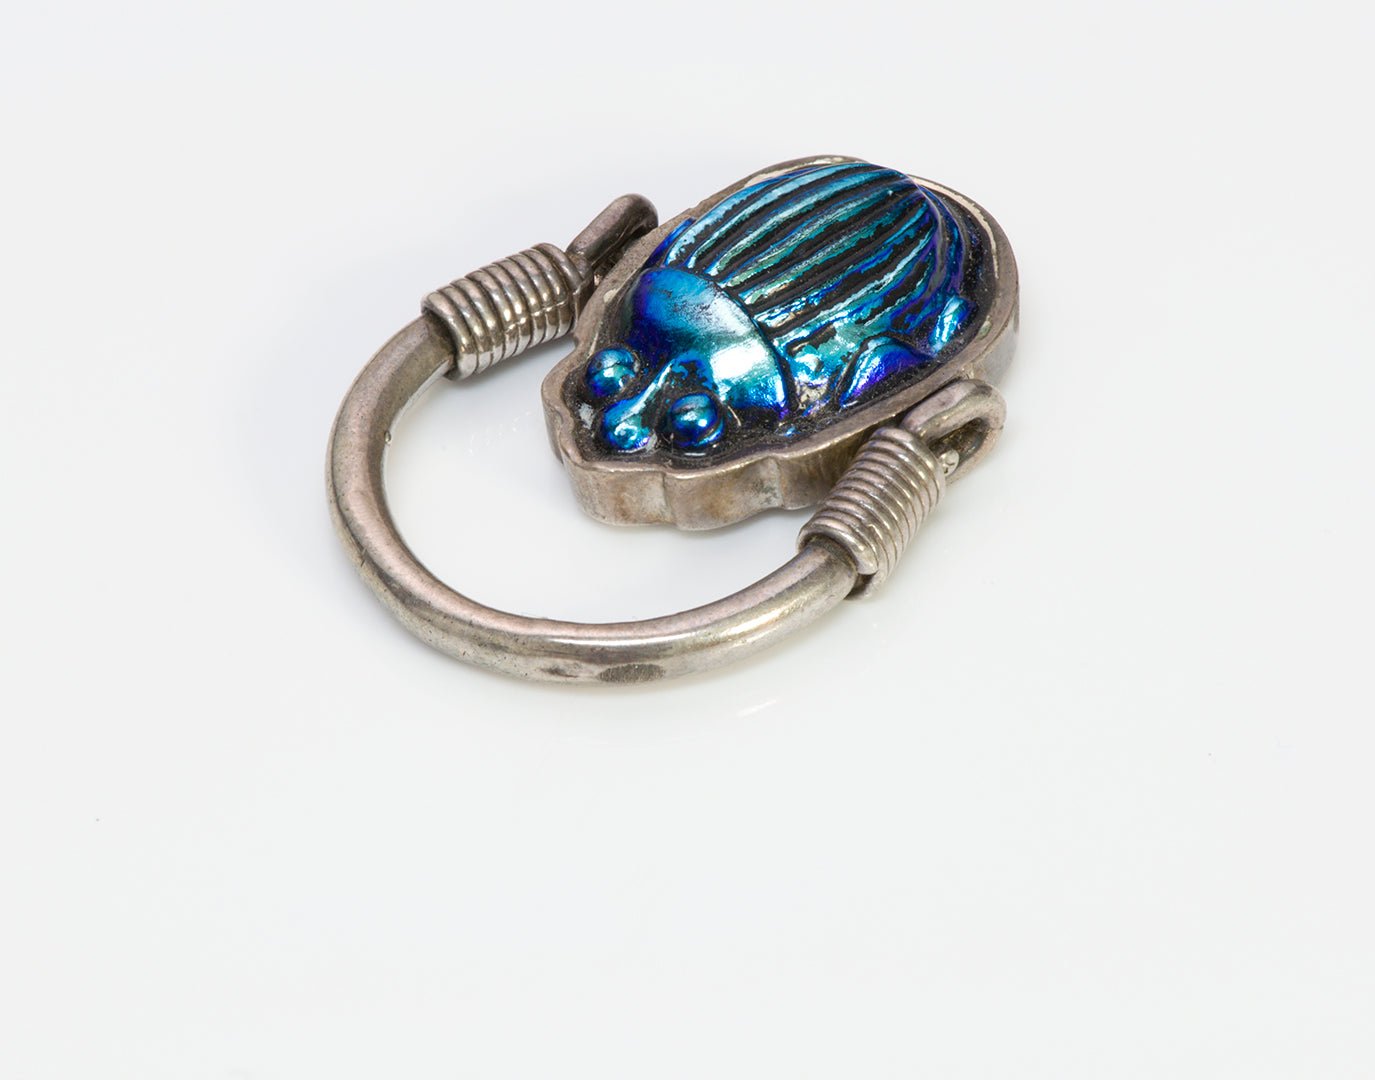 Tiffany Favrille Glass Scarab Egyptian Revival Silver Ring